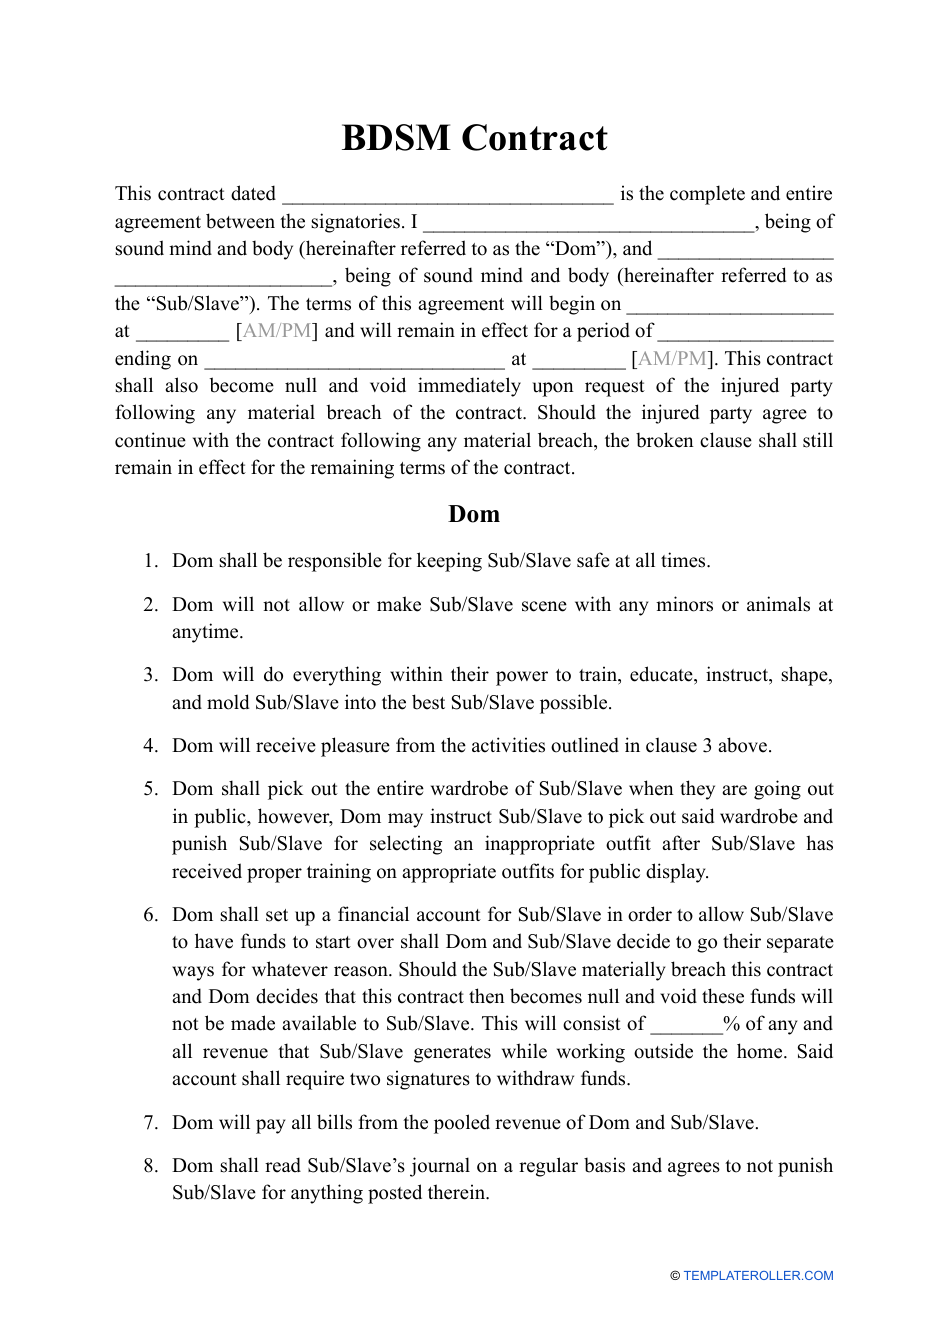 Bdsm Contract Template, Page 1